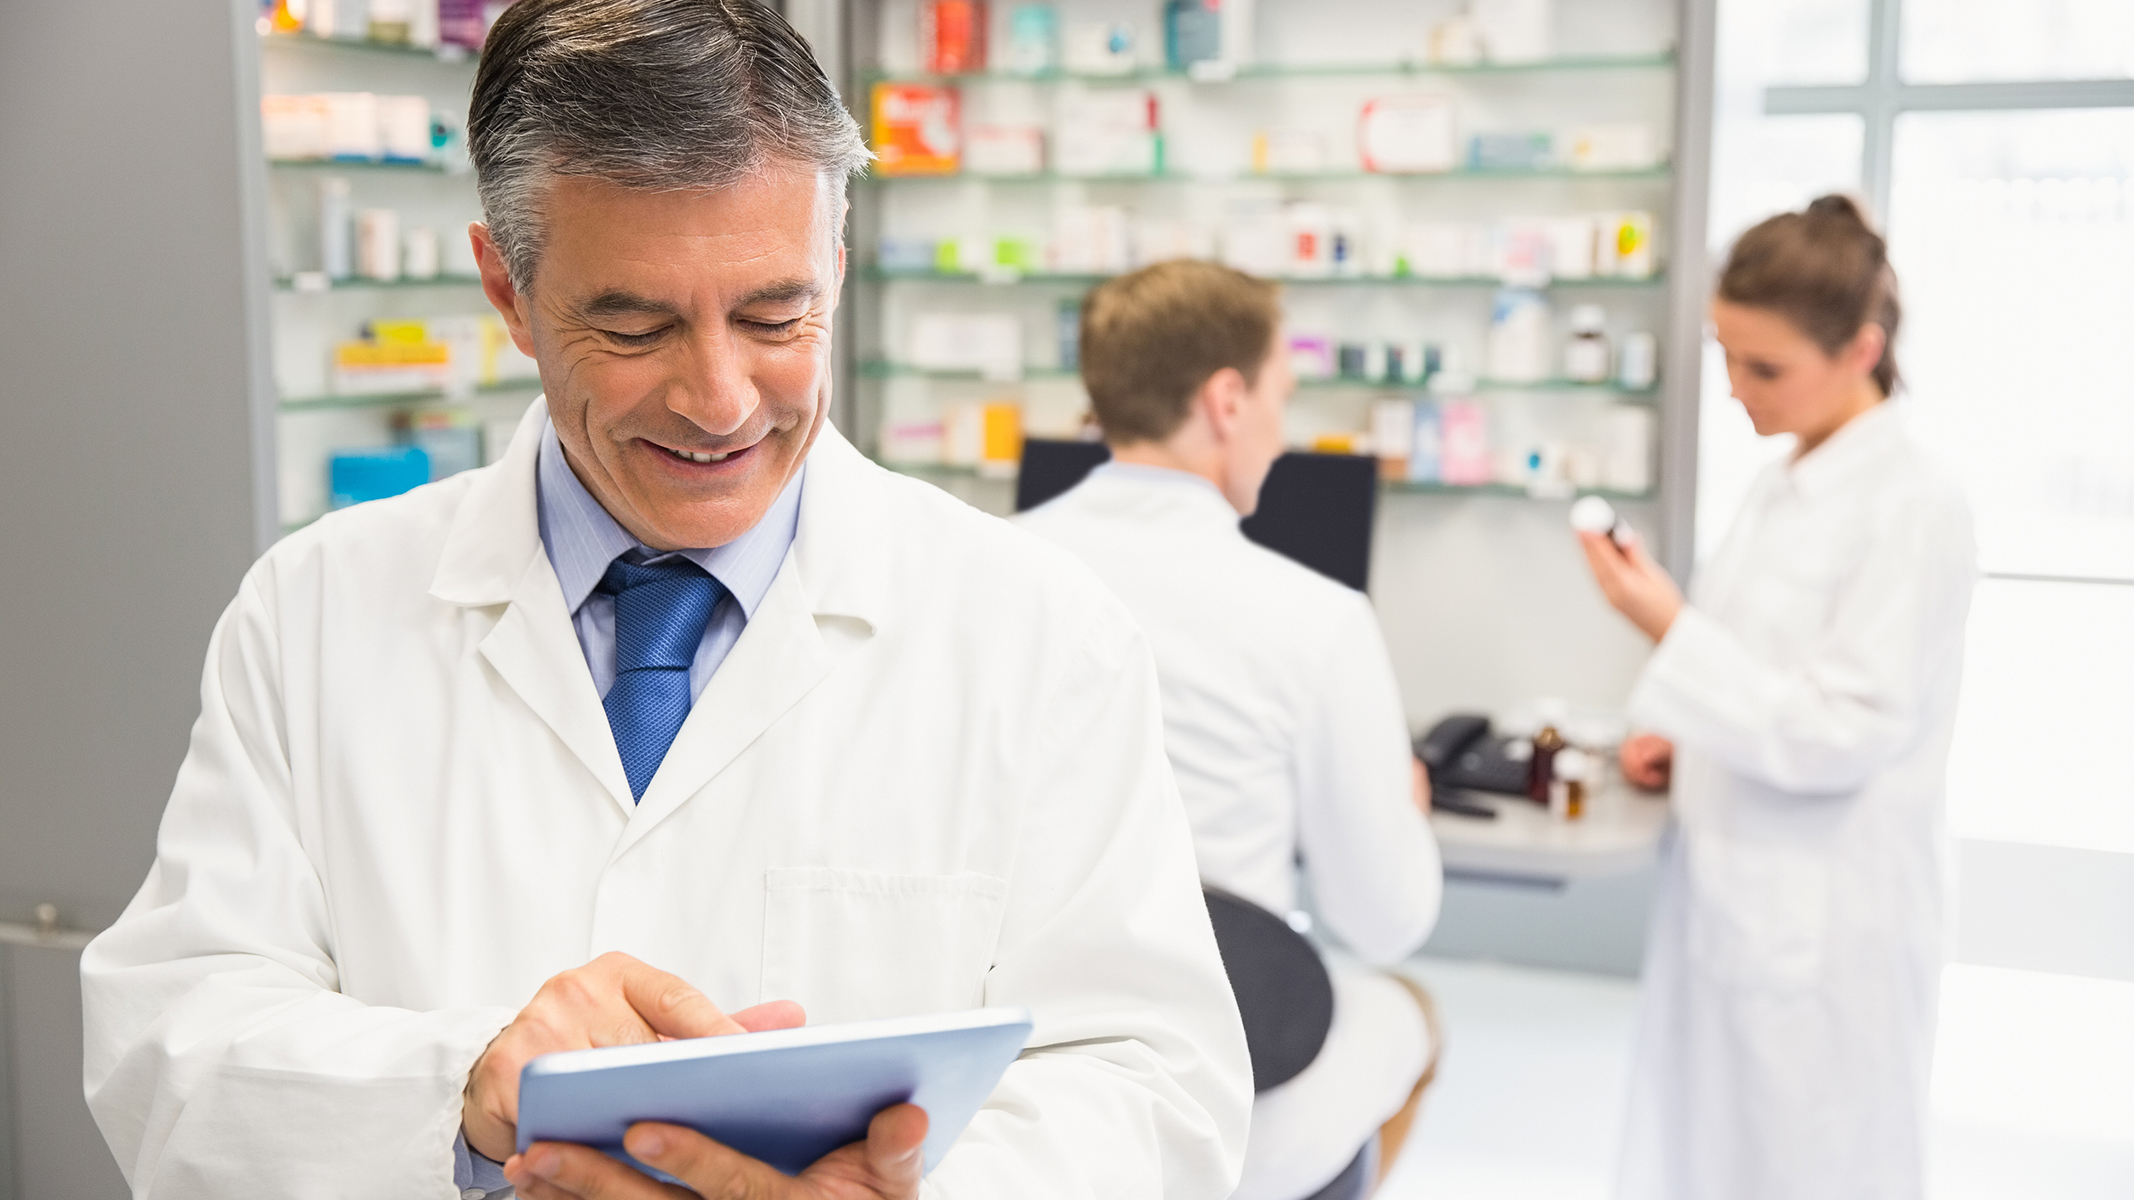 Male pharmacist using a tablet in a pharmacy.